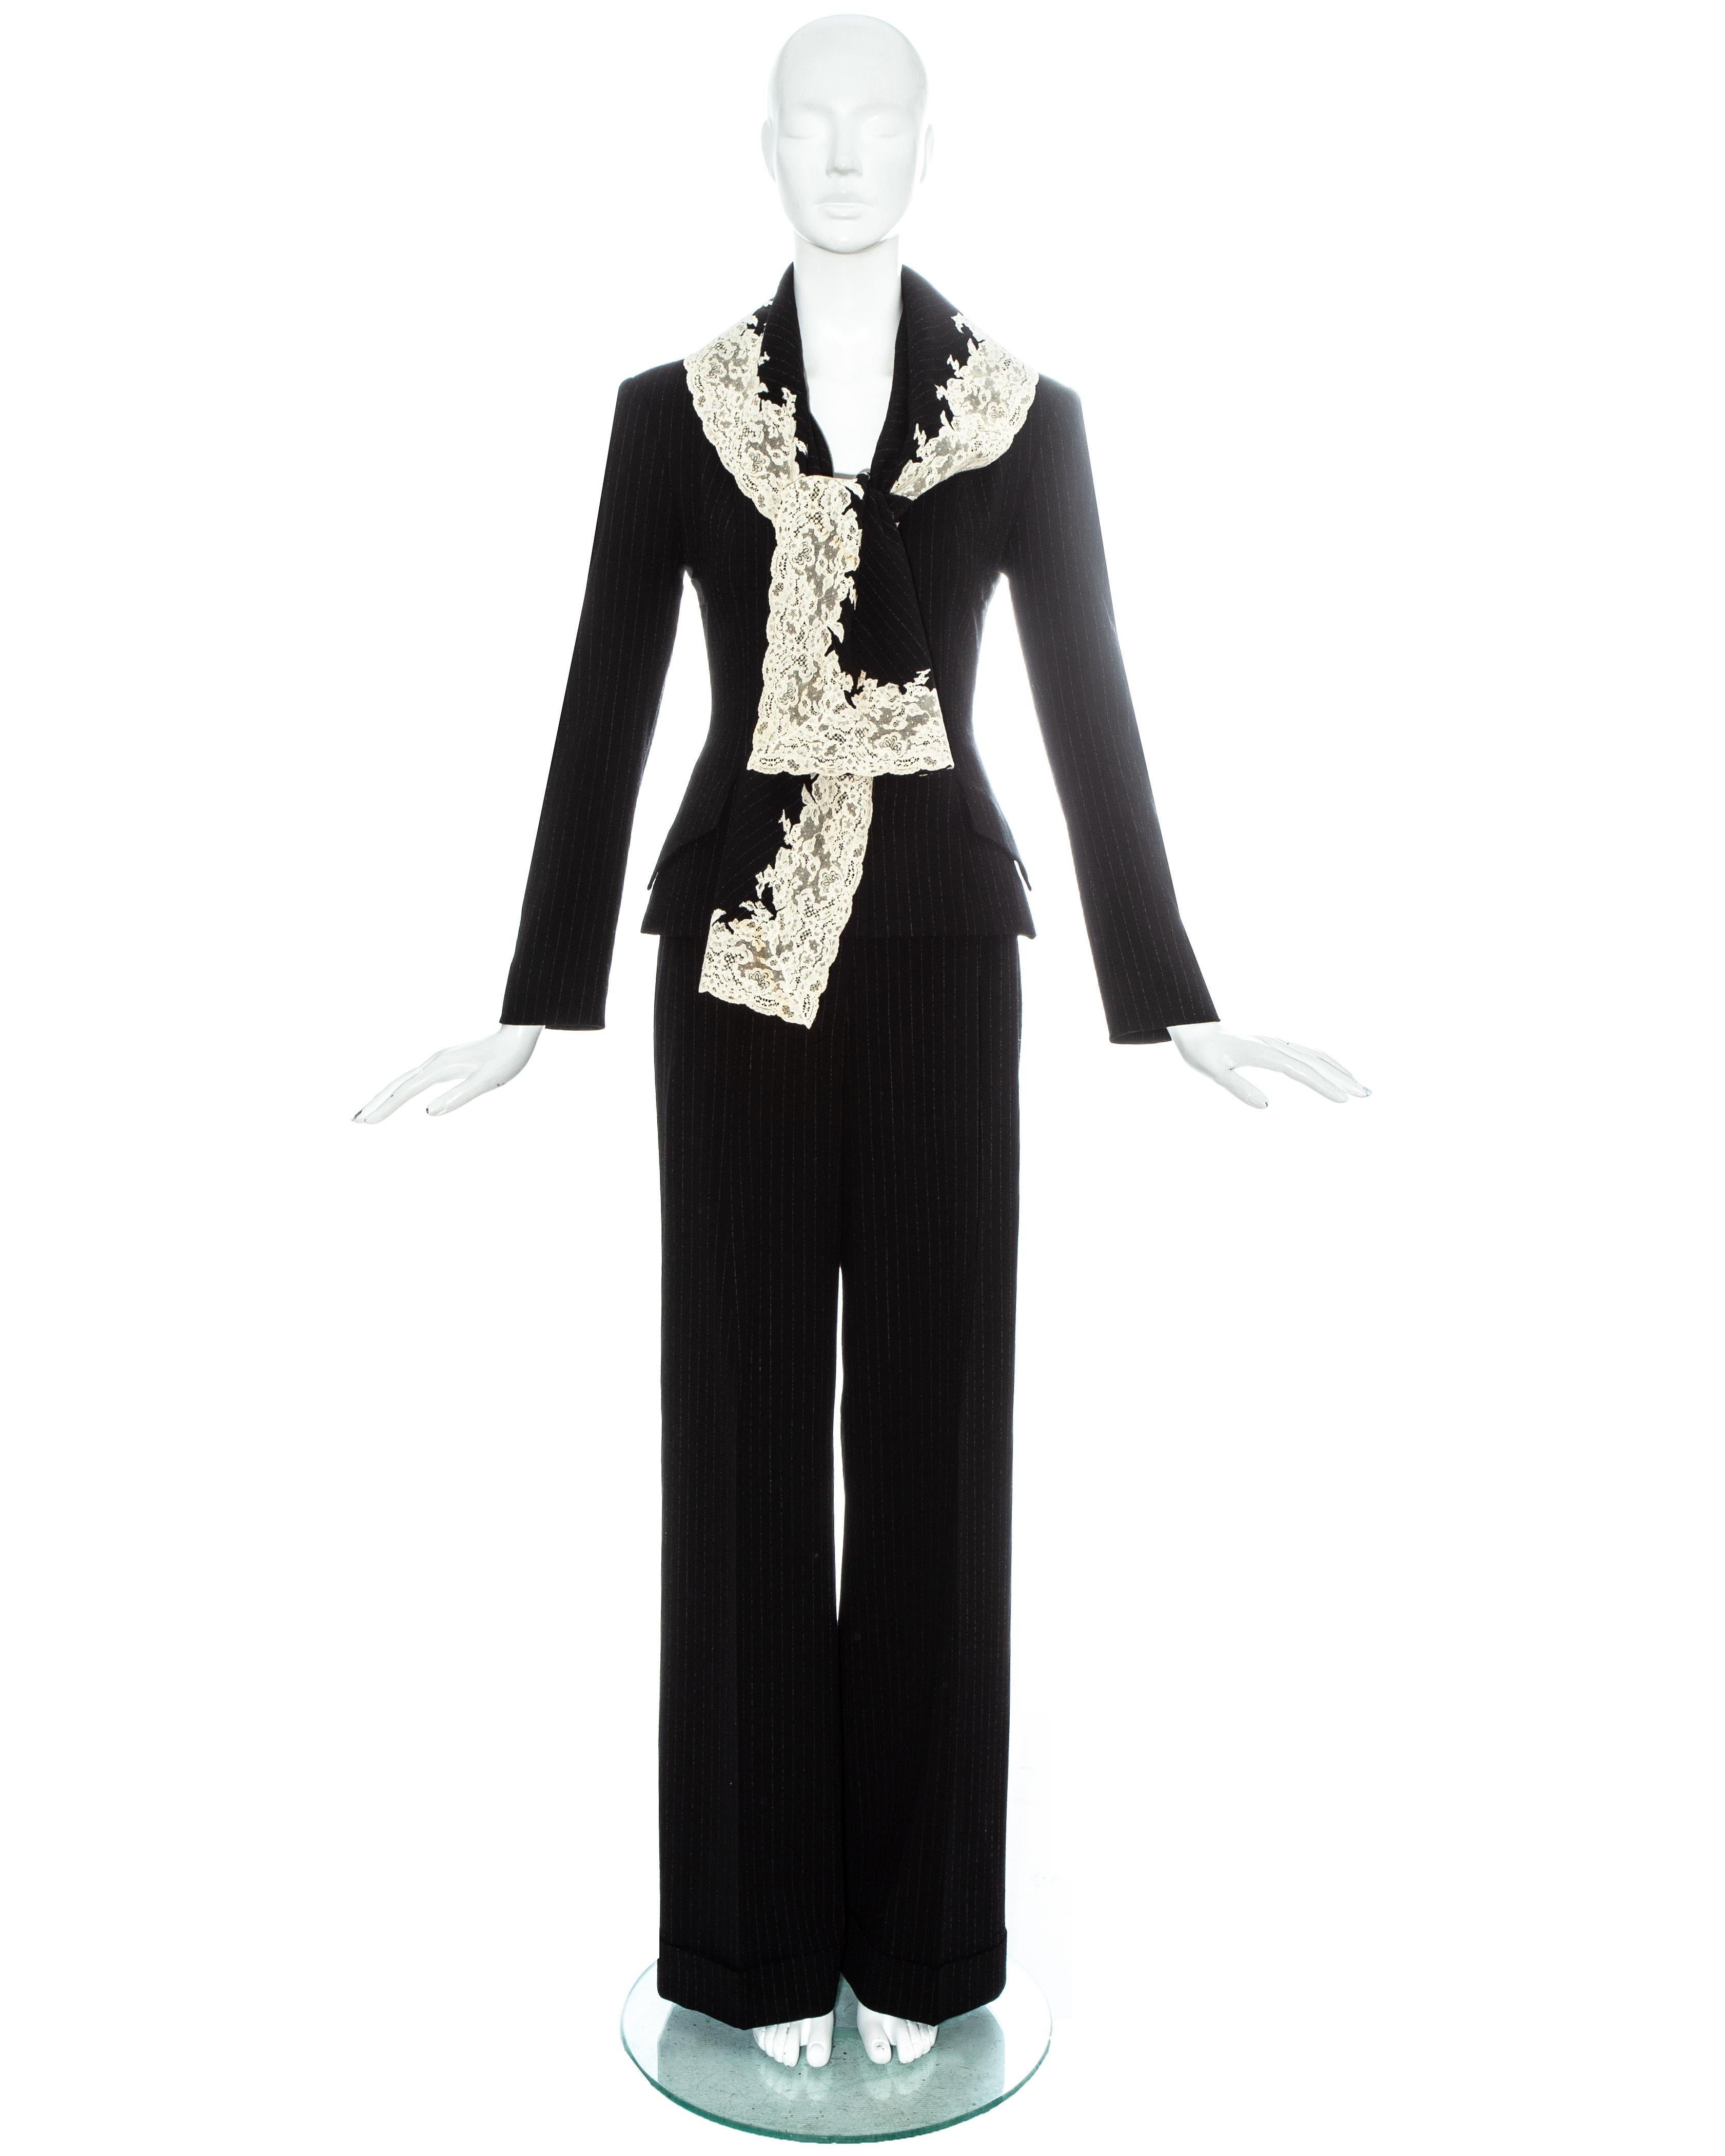 Christian Dior by John Galliano. Black pinstriped wool crepe pant suit edged in white Calais lace. Blazer jacket with shawl attached to the collar, two front flap pockets, fabric button closures and silk lining with embroidered 'CD'. Sold with